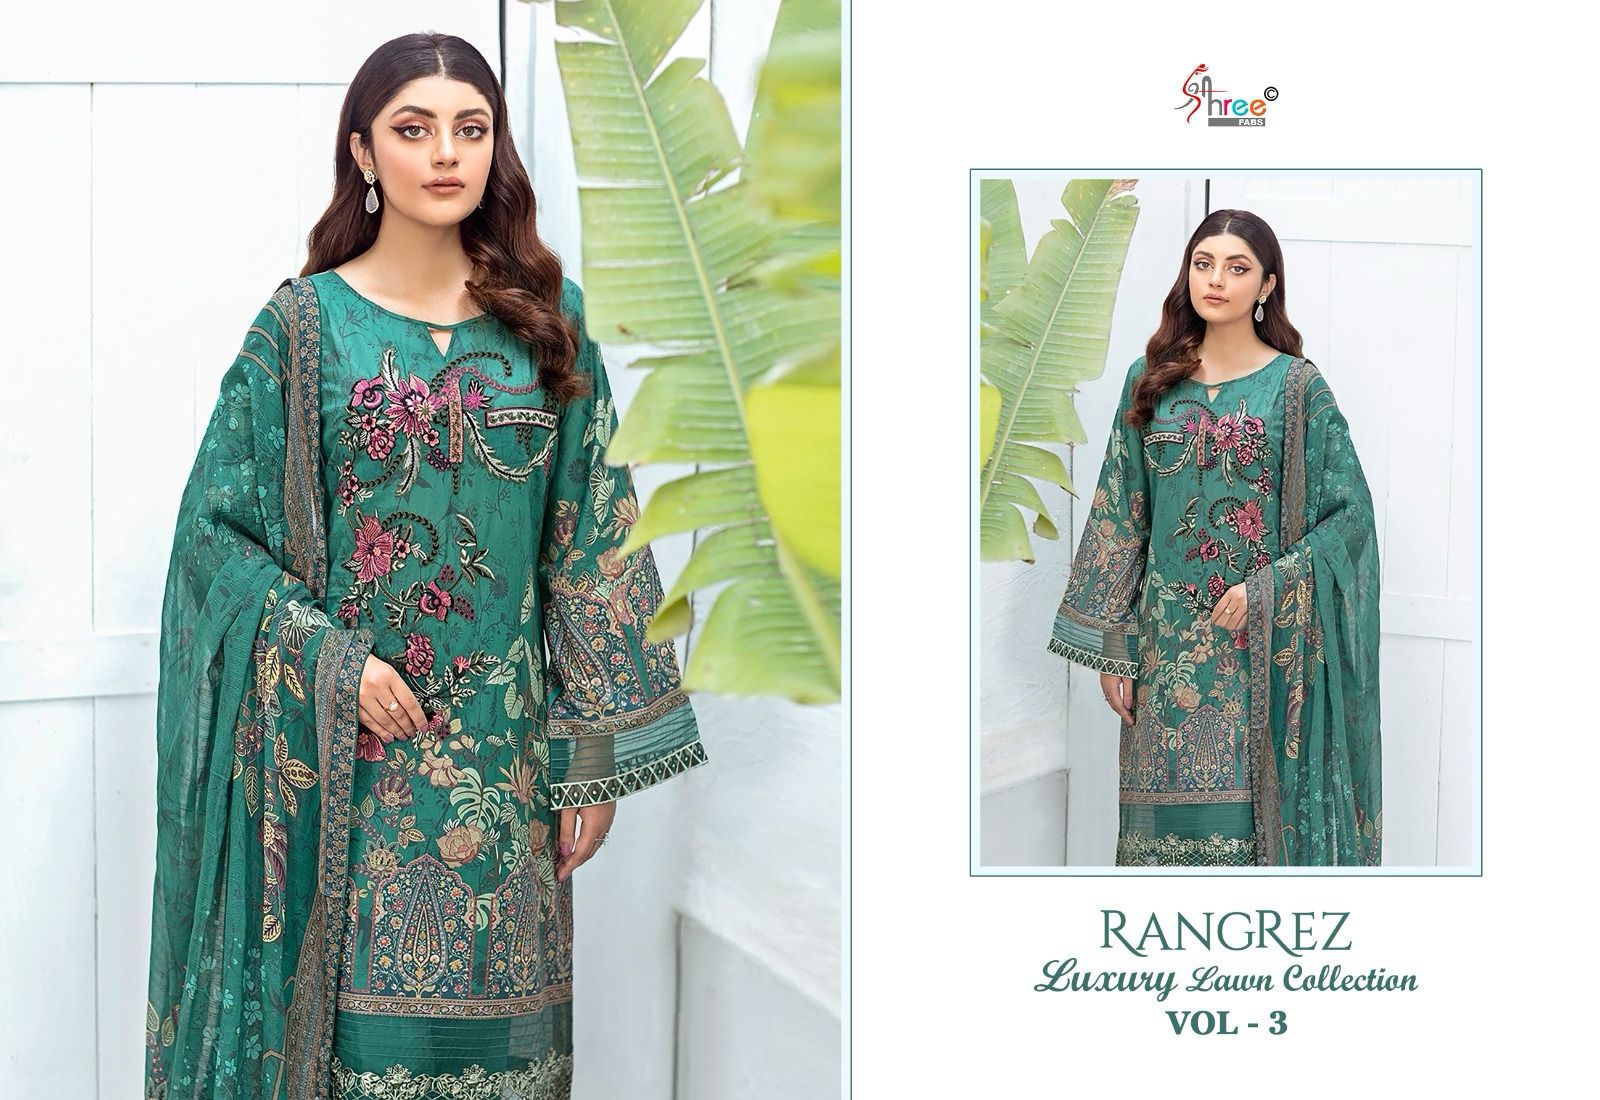 Shree Rangrez Luxury Lawn Collection Vol 3 collection 3